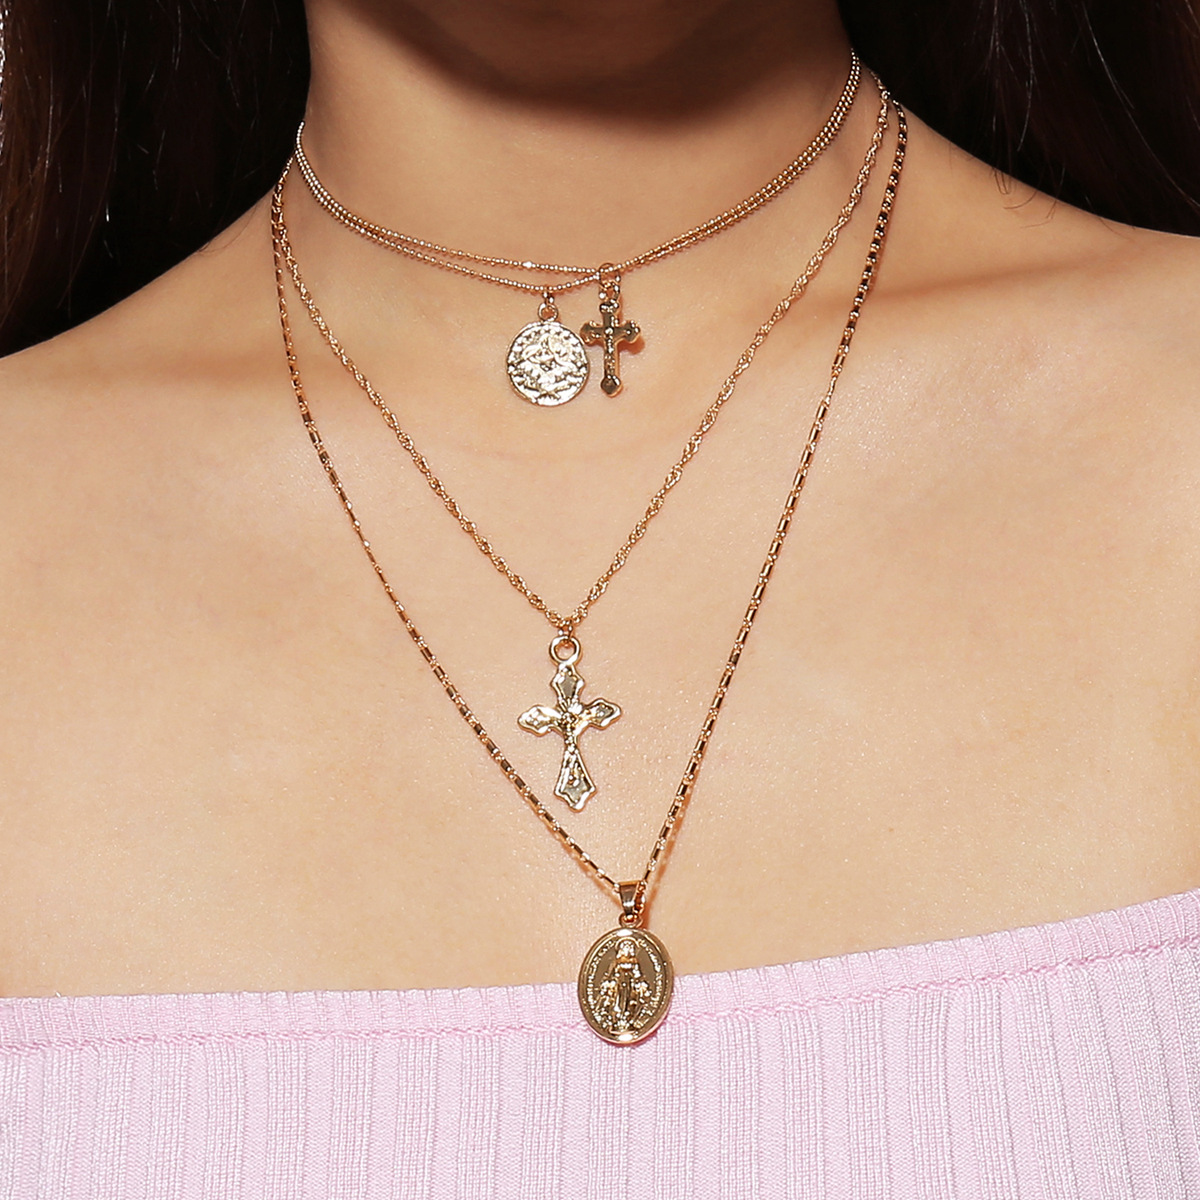 Stylish Multi-tiered Notre Dame Cross Pendant Necklace